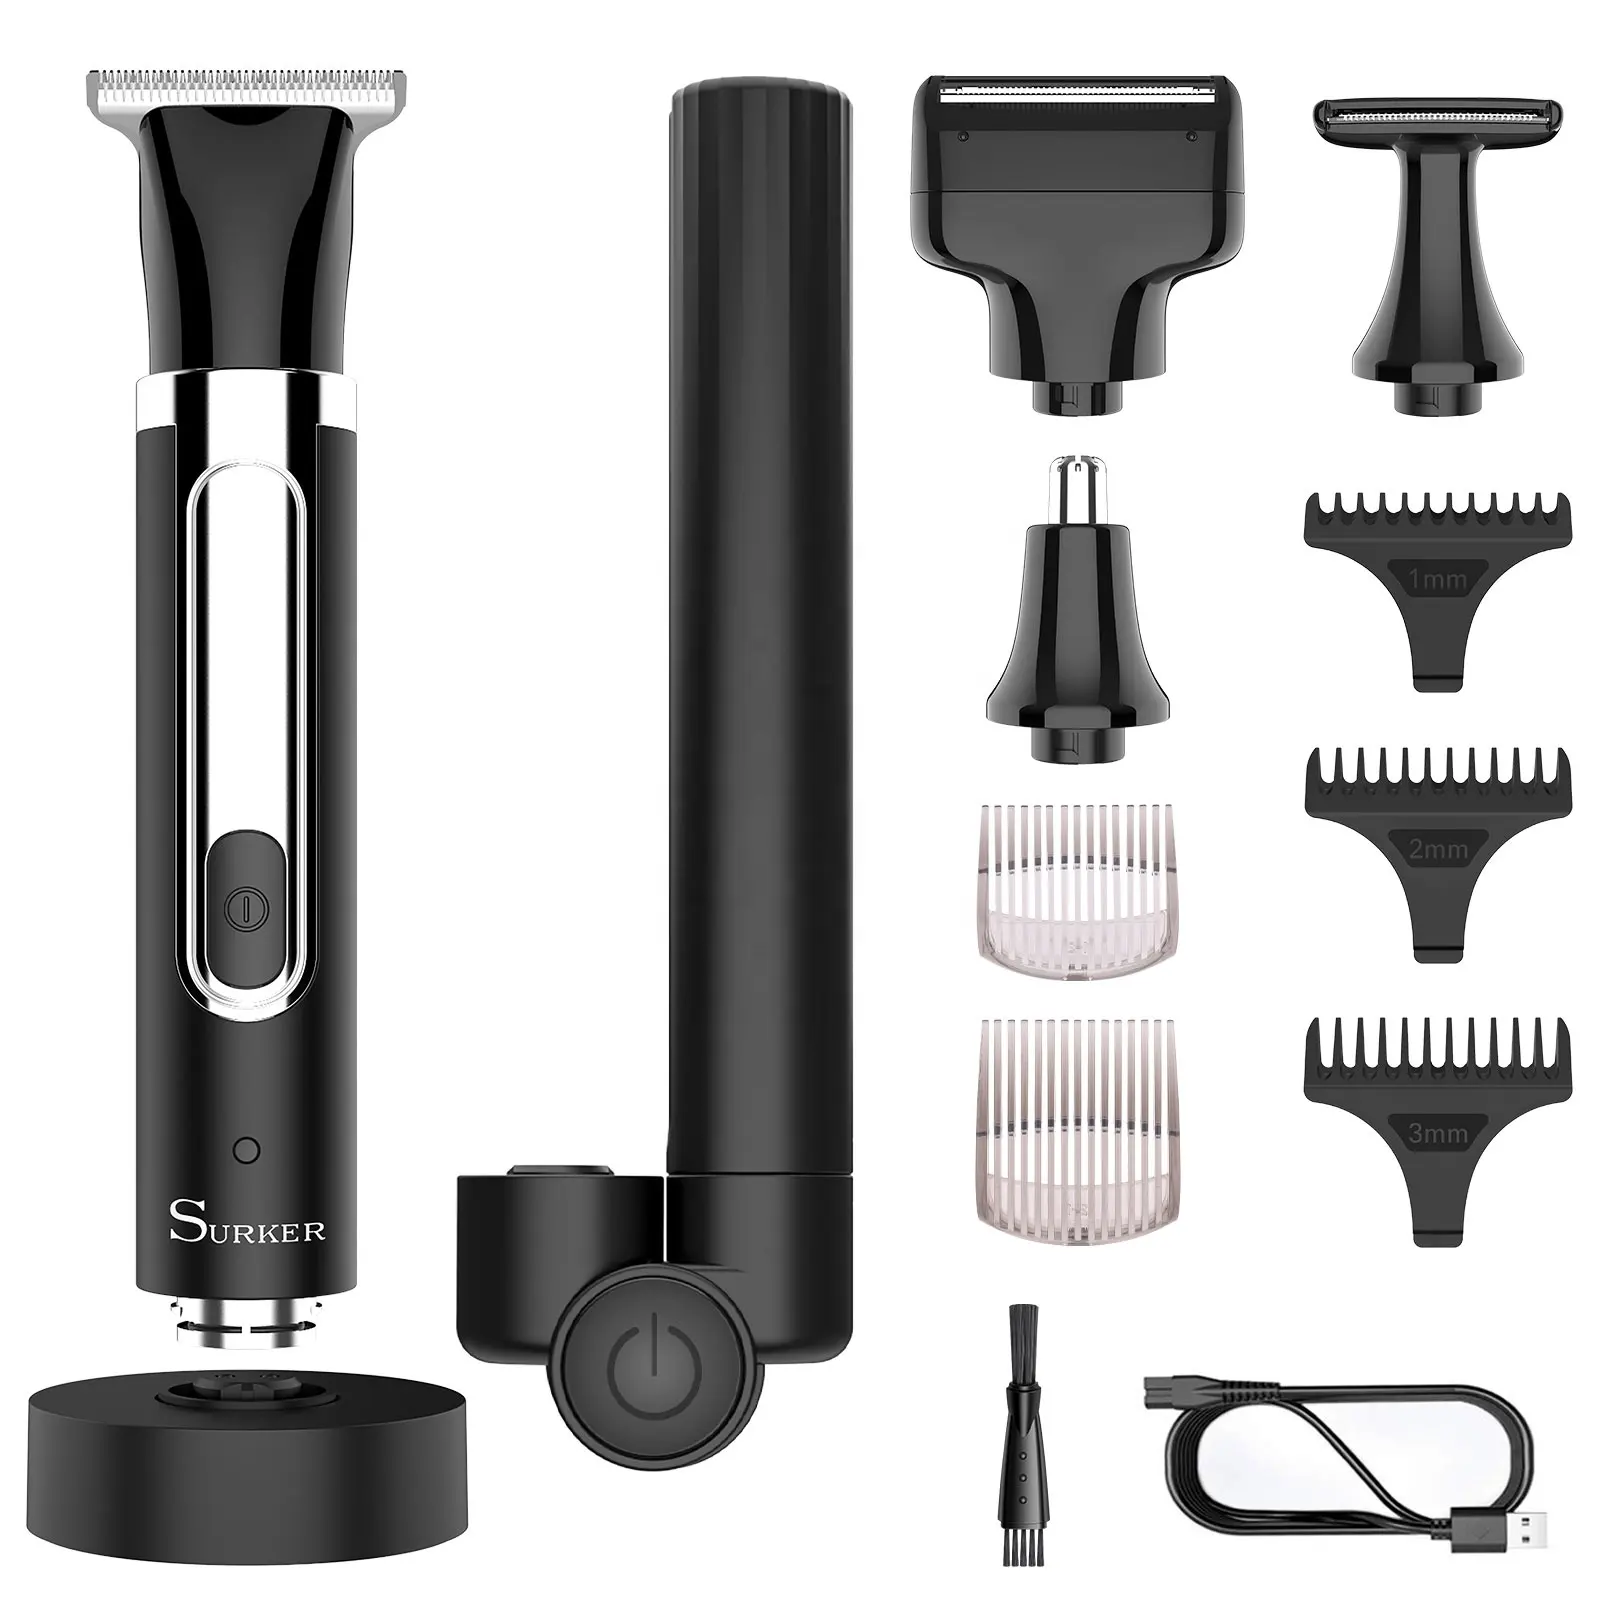 New 4 in 1 Men Personal Groomer Long Detachable Handle Grooming Kit Body Hair Trimmer and Shaver For Men